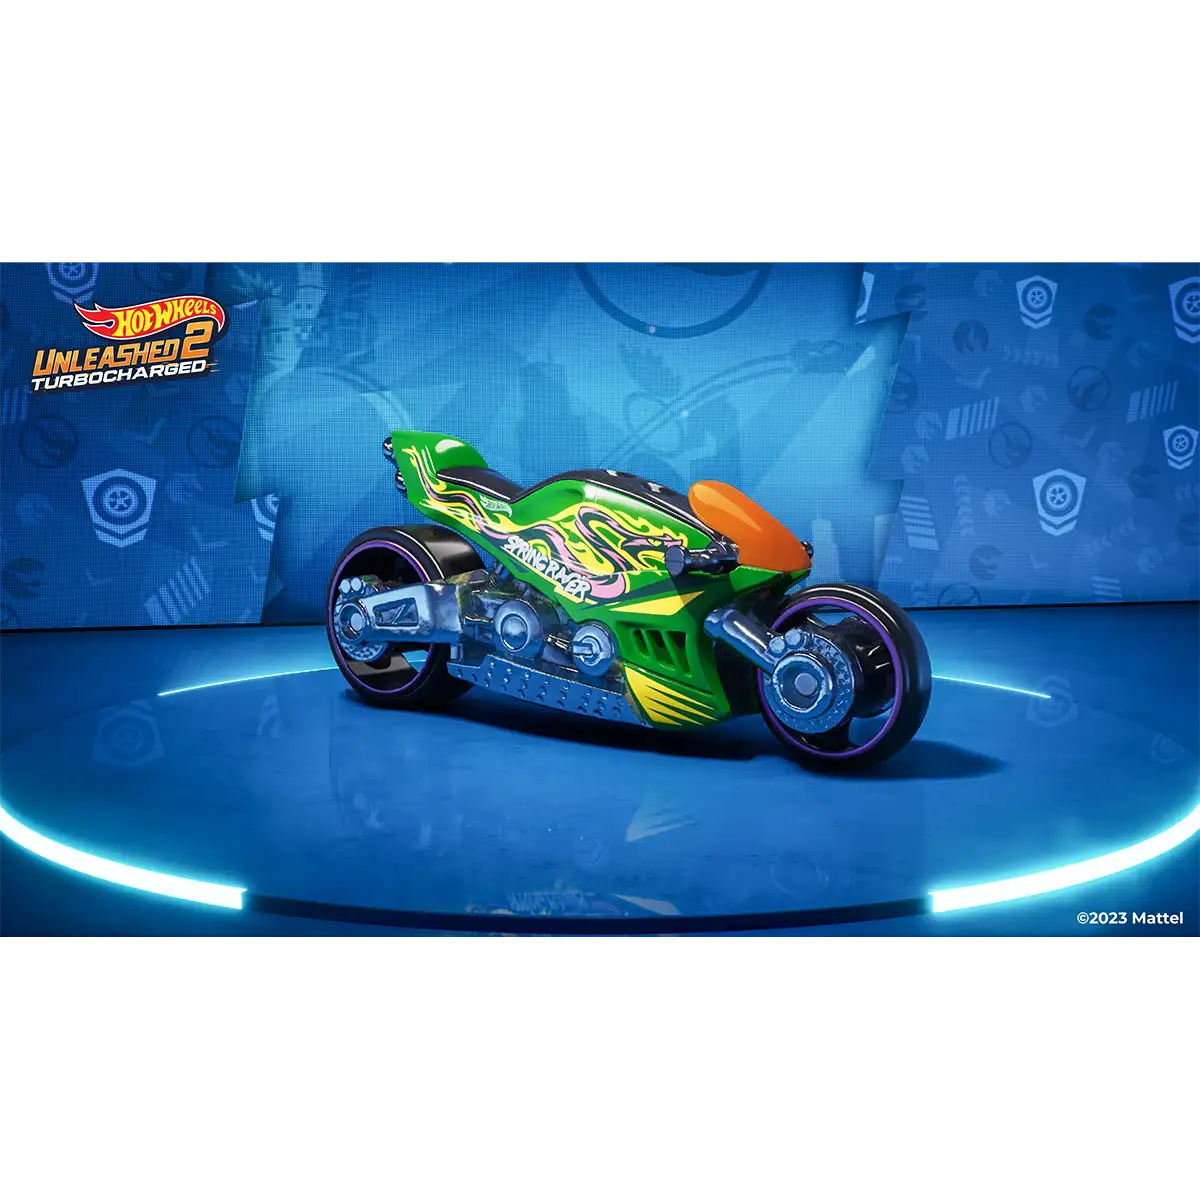 Hot Wheels Unleashed™ 2 Turbocharged Pure Fire Edition (PS4) Image 11